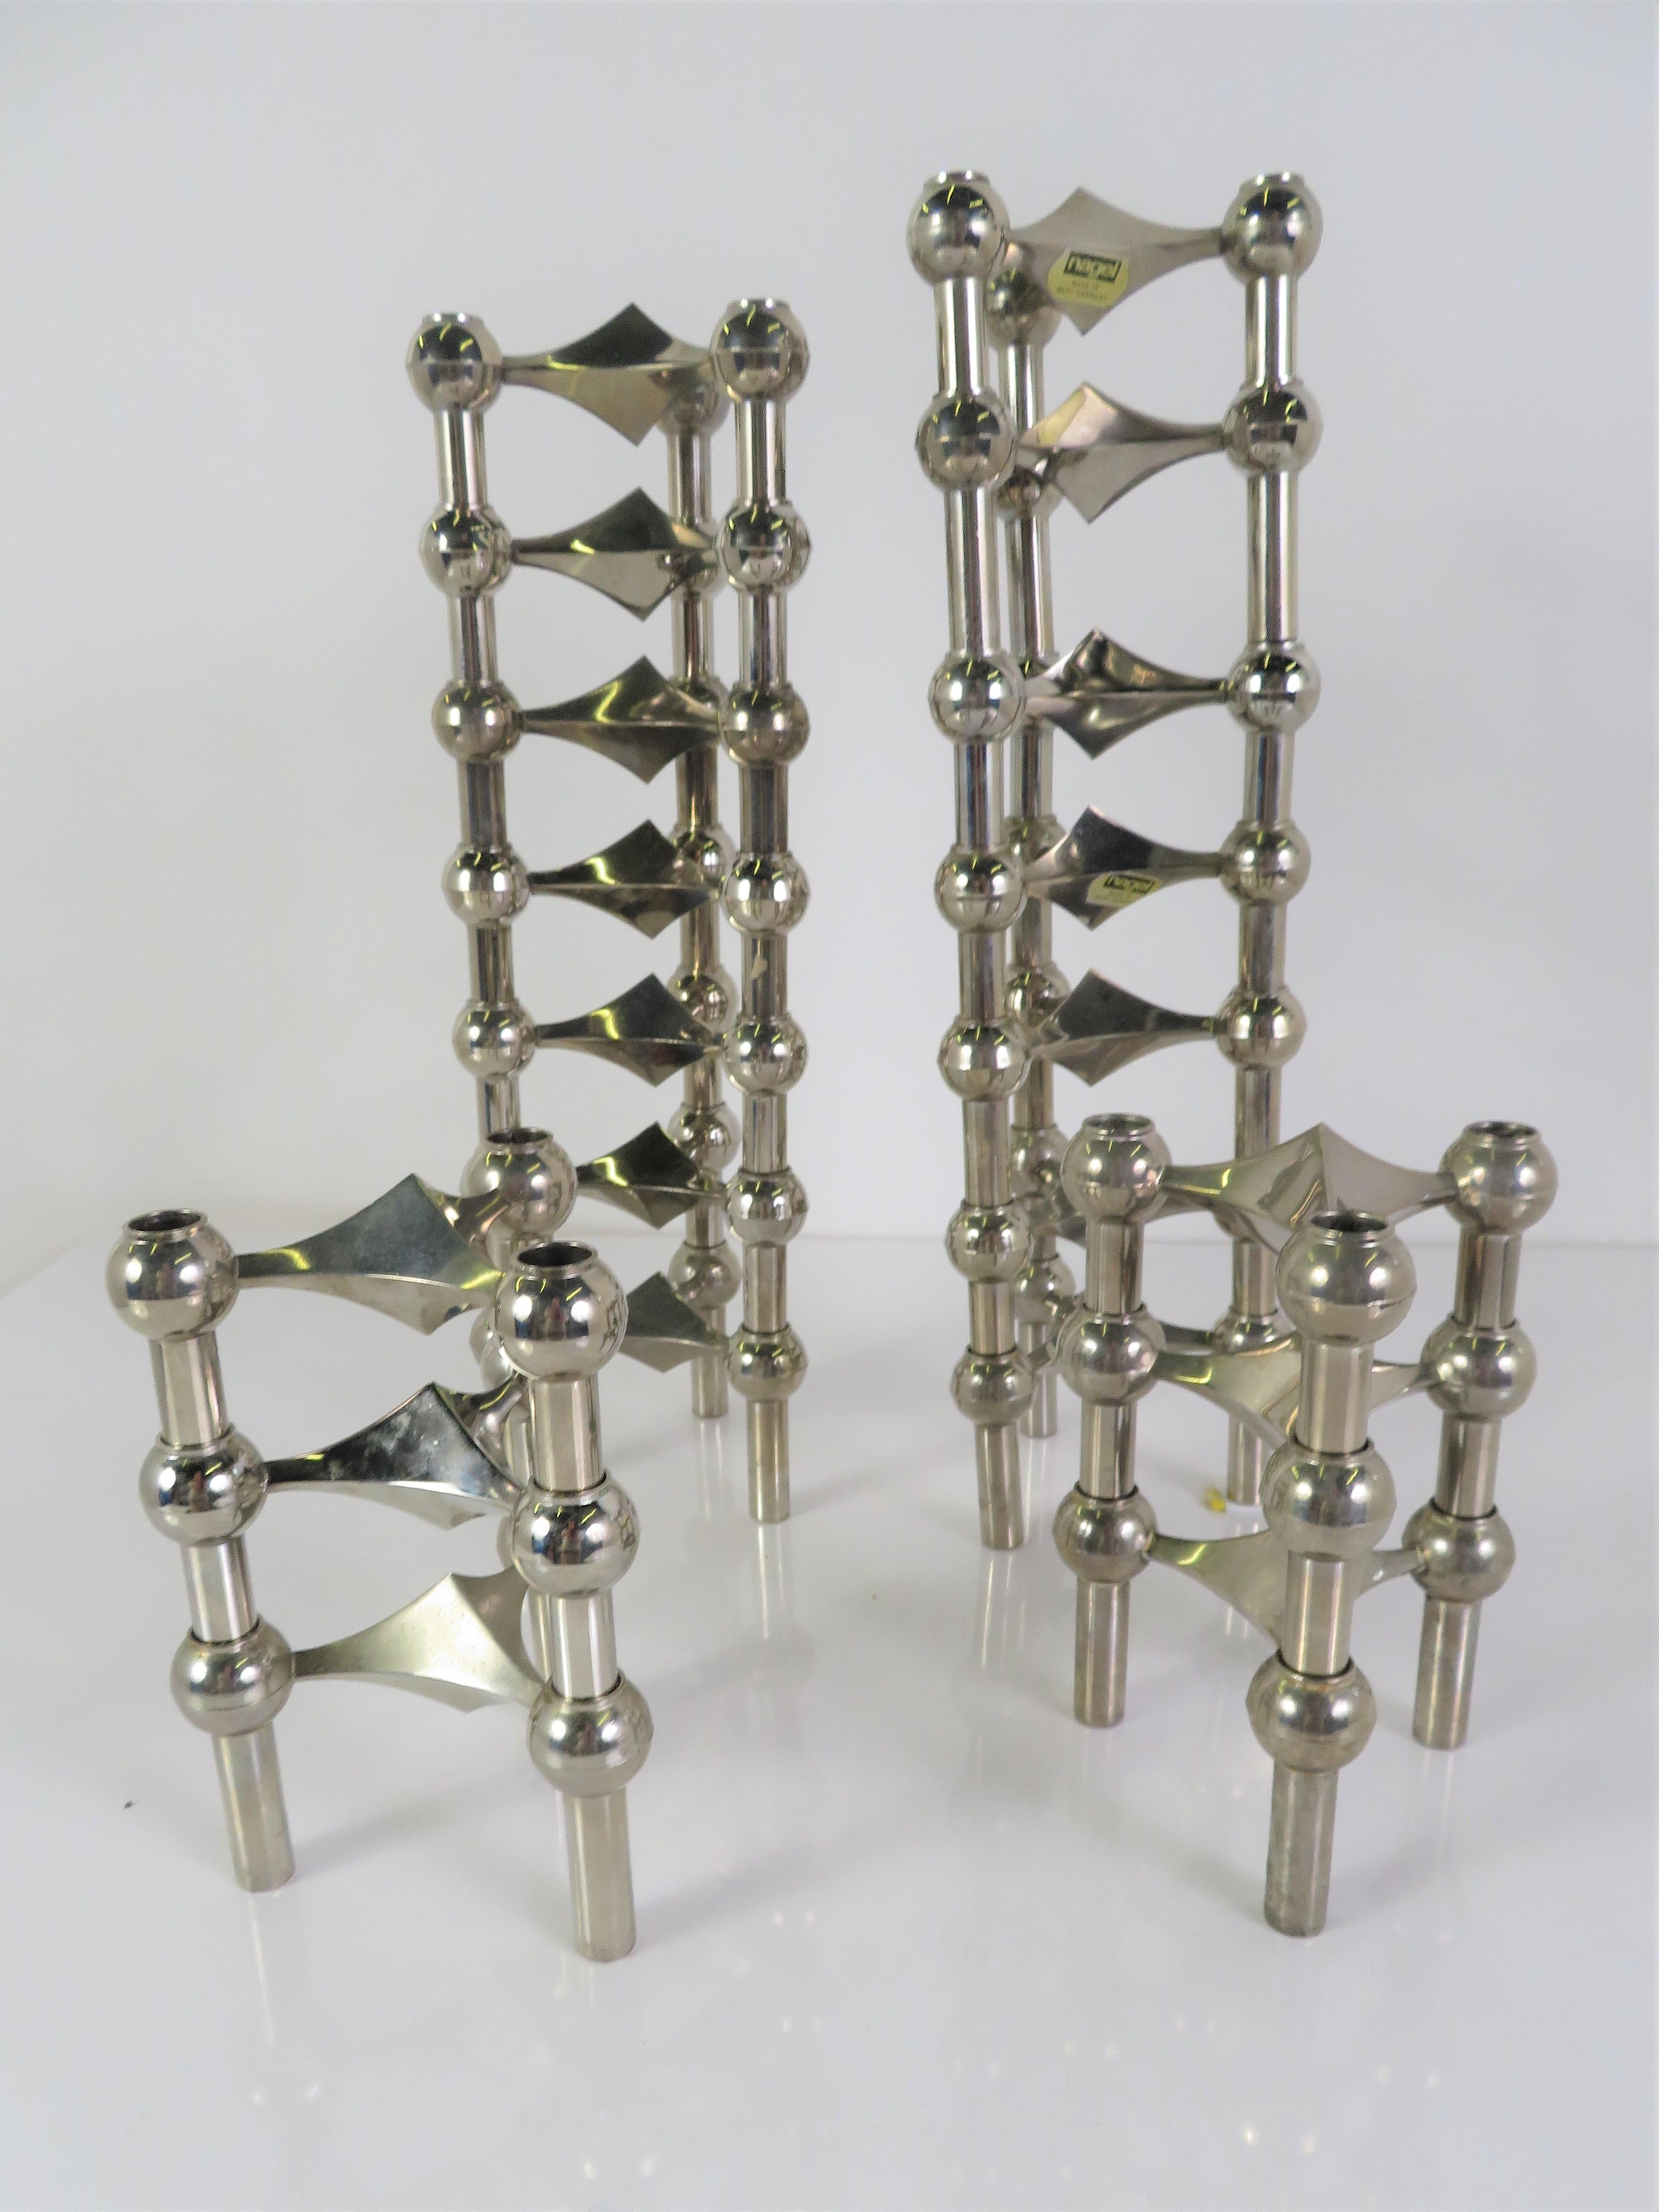 A set of 20 S-22 model stackable 3-legged chrome modular candleholders by Hans Nagel (1926-1978) and Werner Stoff (1940-2021) from the 1960s. Made in Germany, the special beauty of the design is that any number of candleholders can be combined into